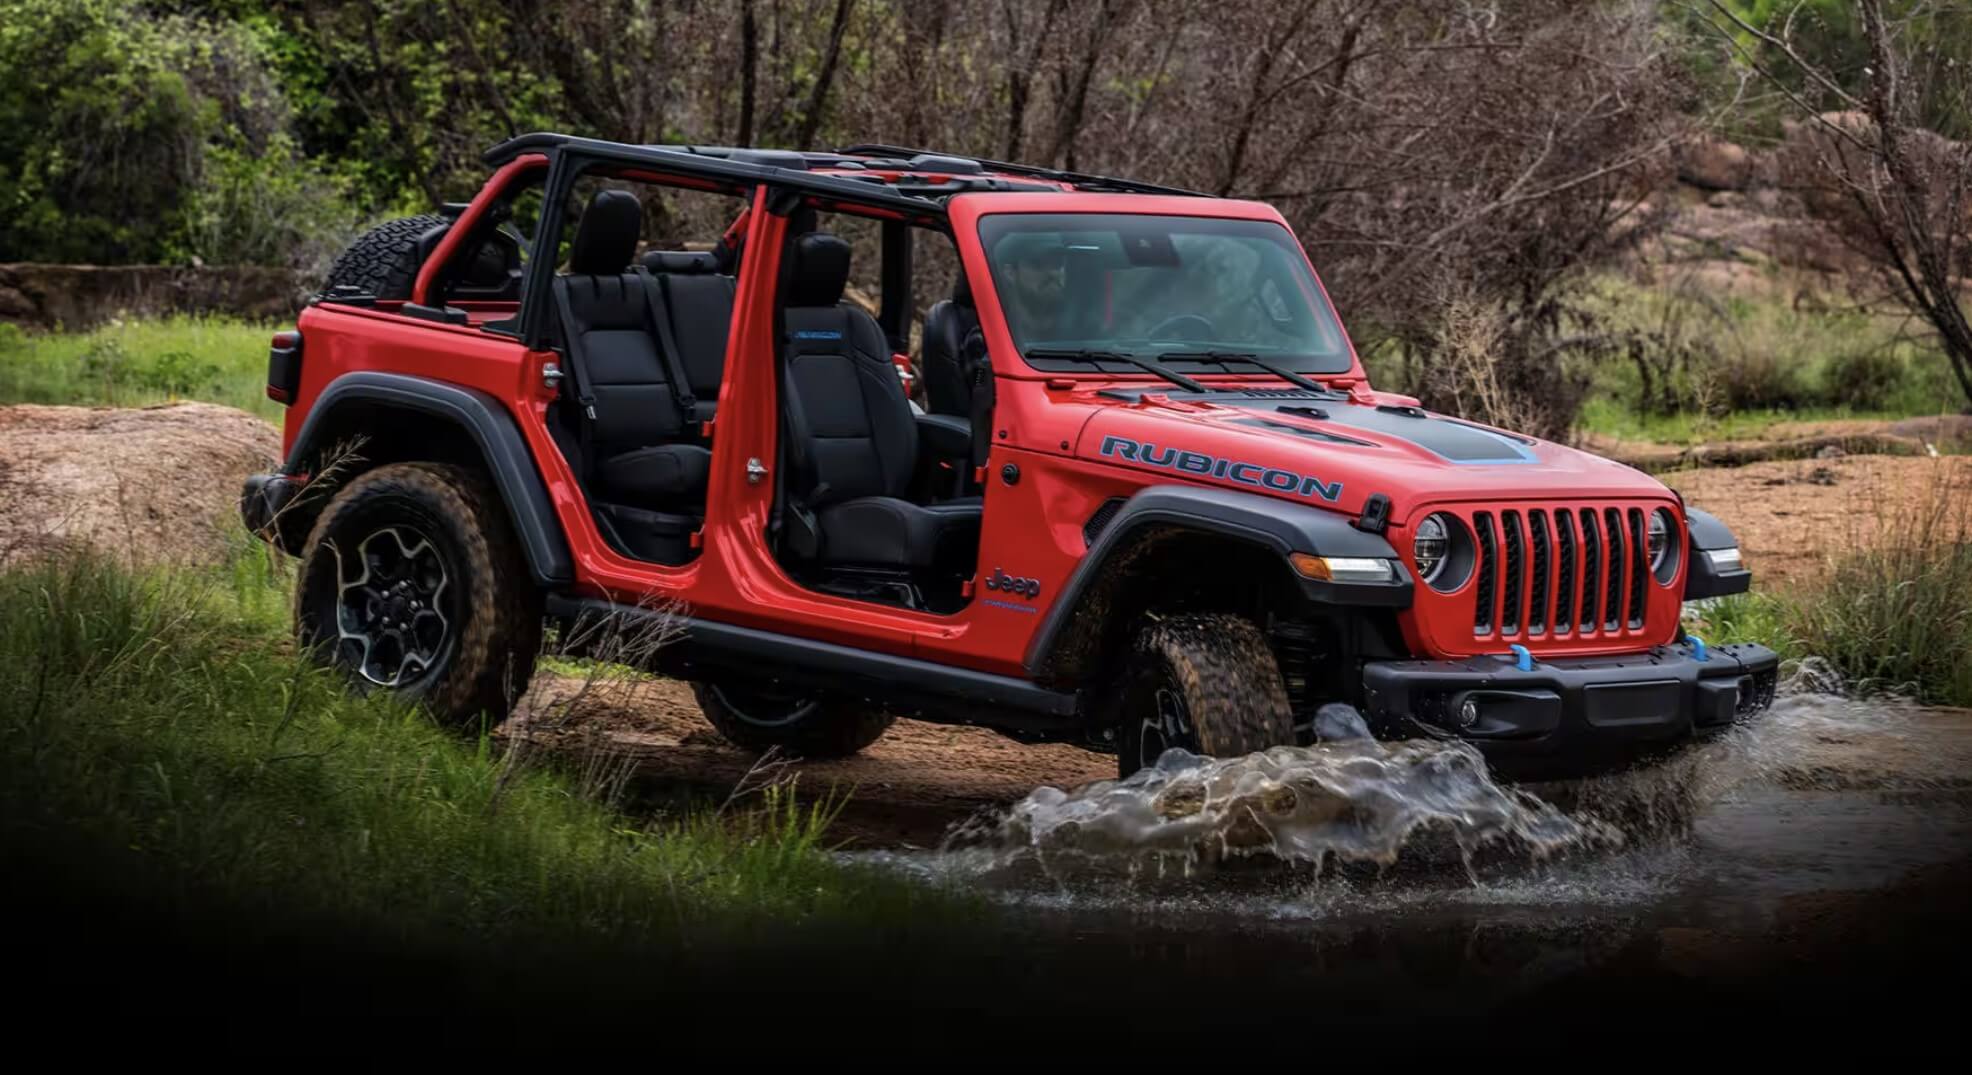 The Jeep Wrangler fording water while off-roading